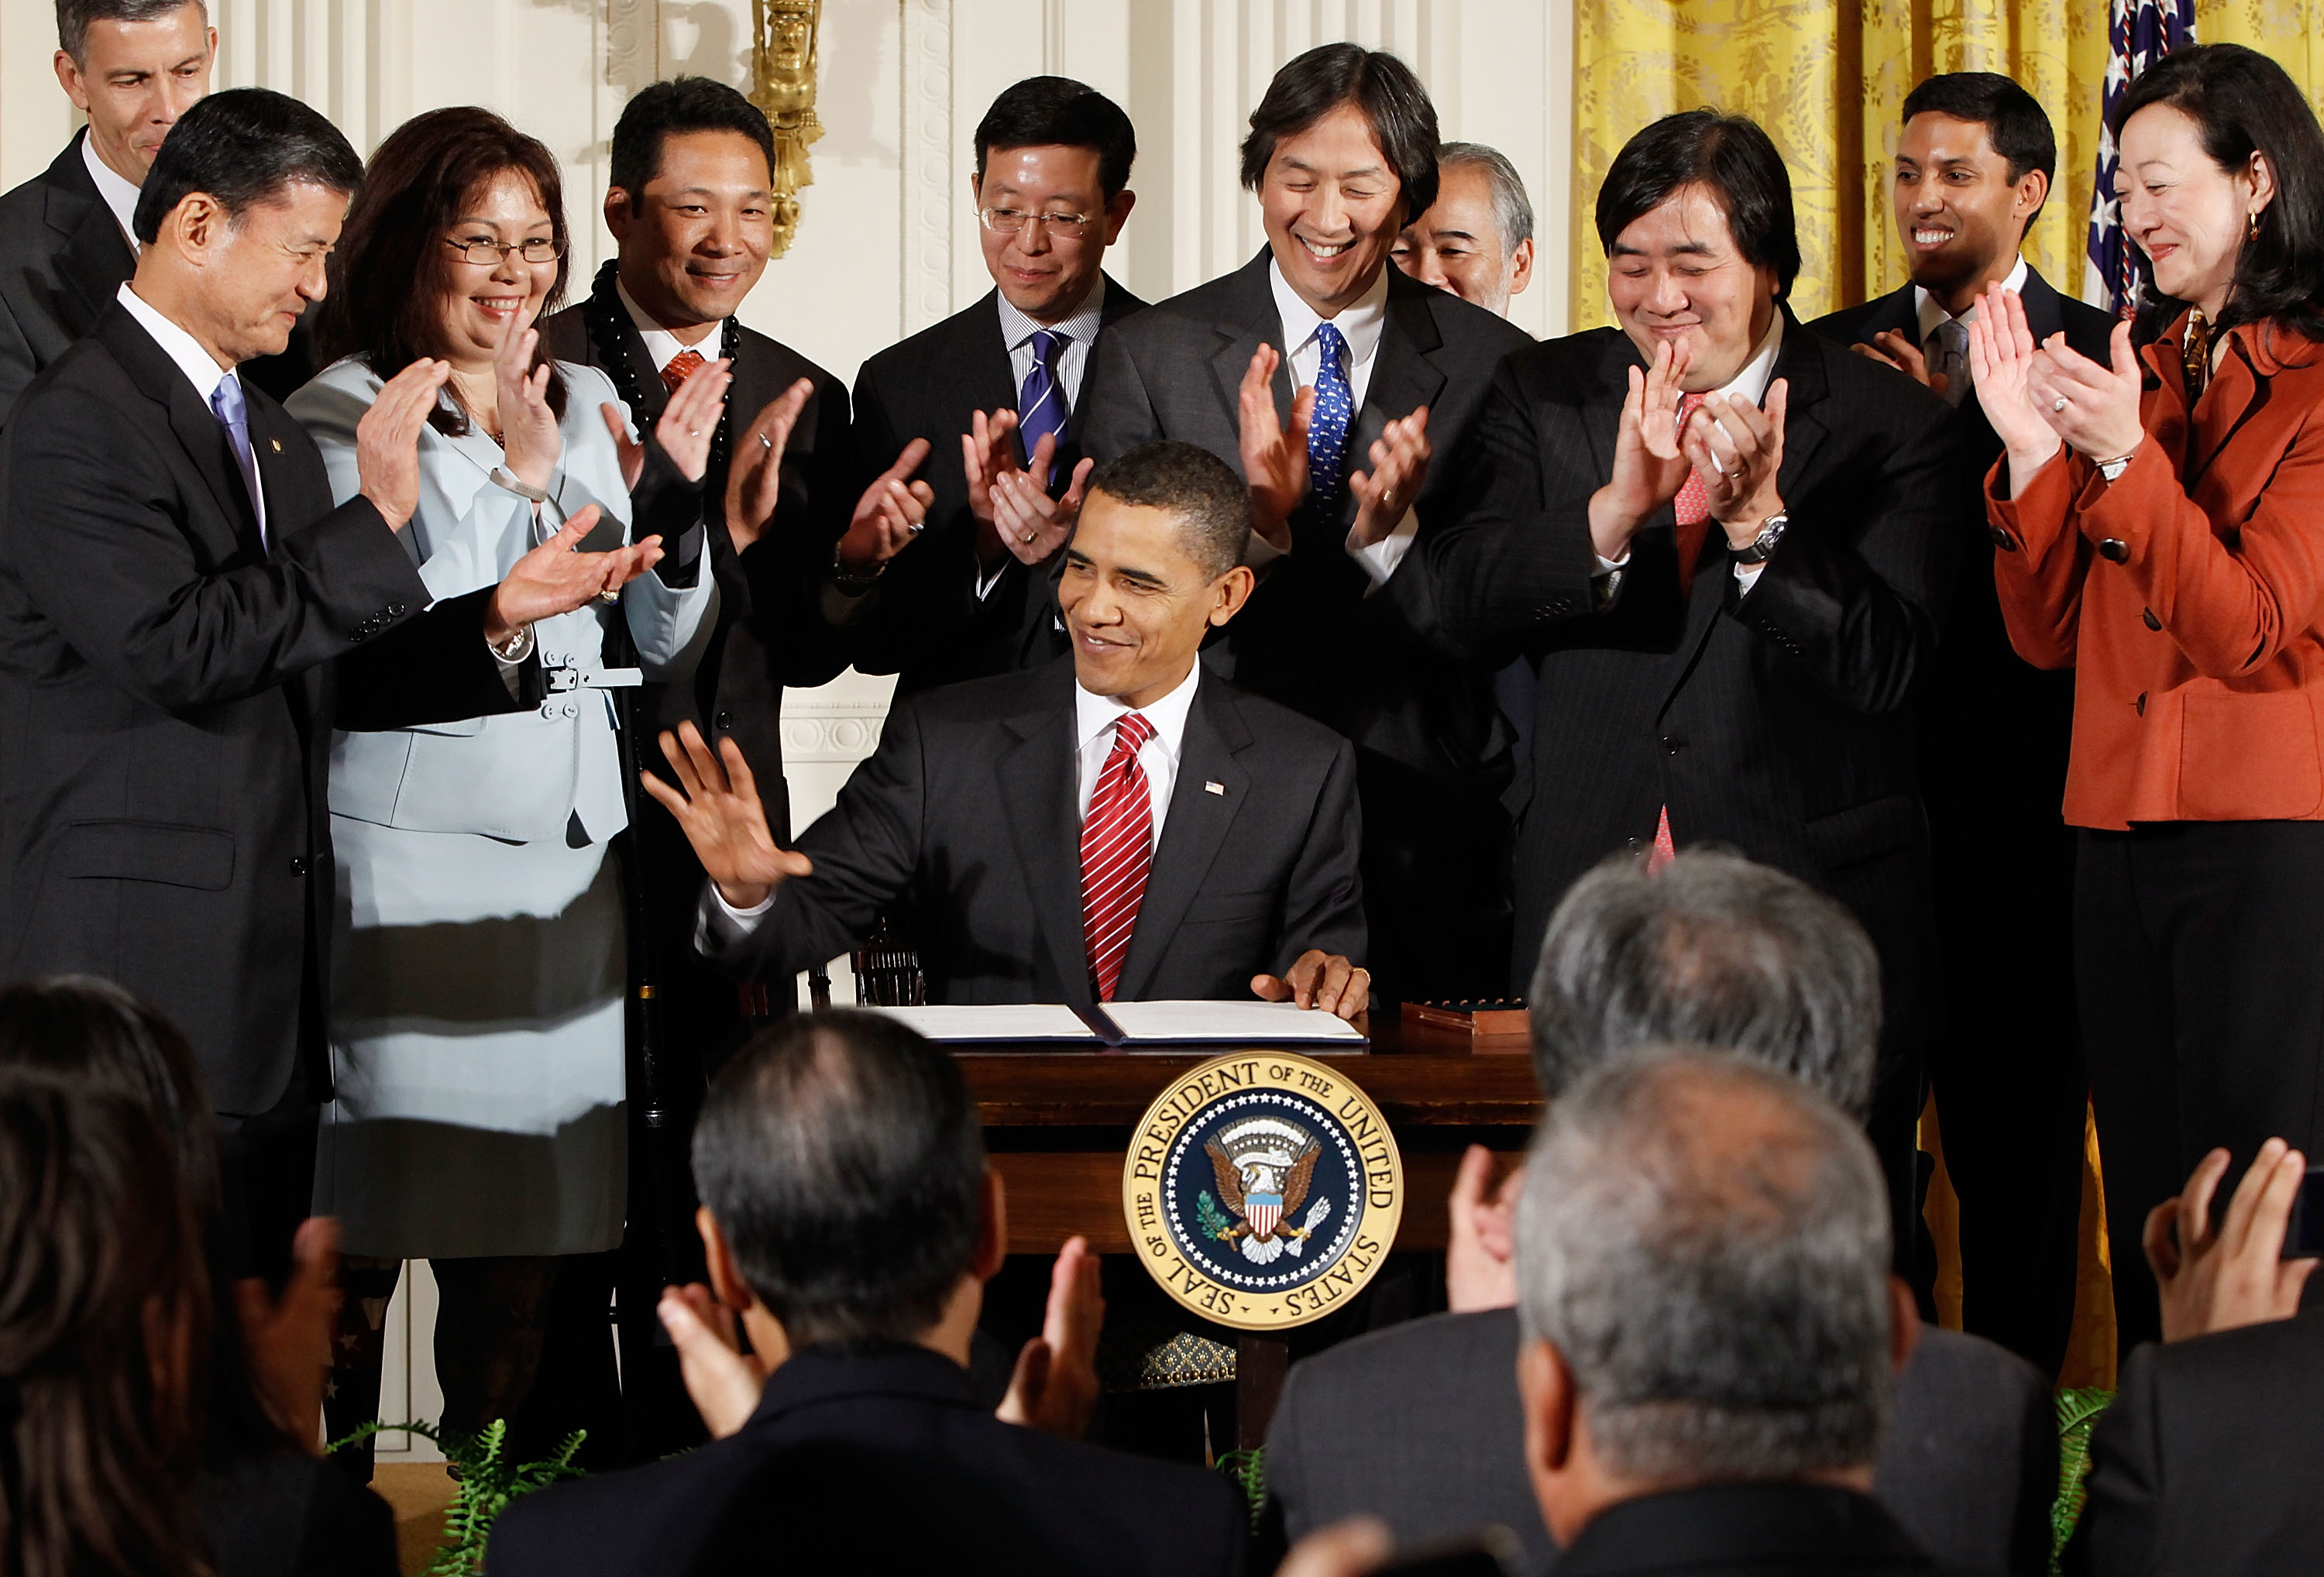 The White House Commission on Asian American and Pacific Islanders Just Lost Most of Its Members